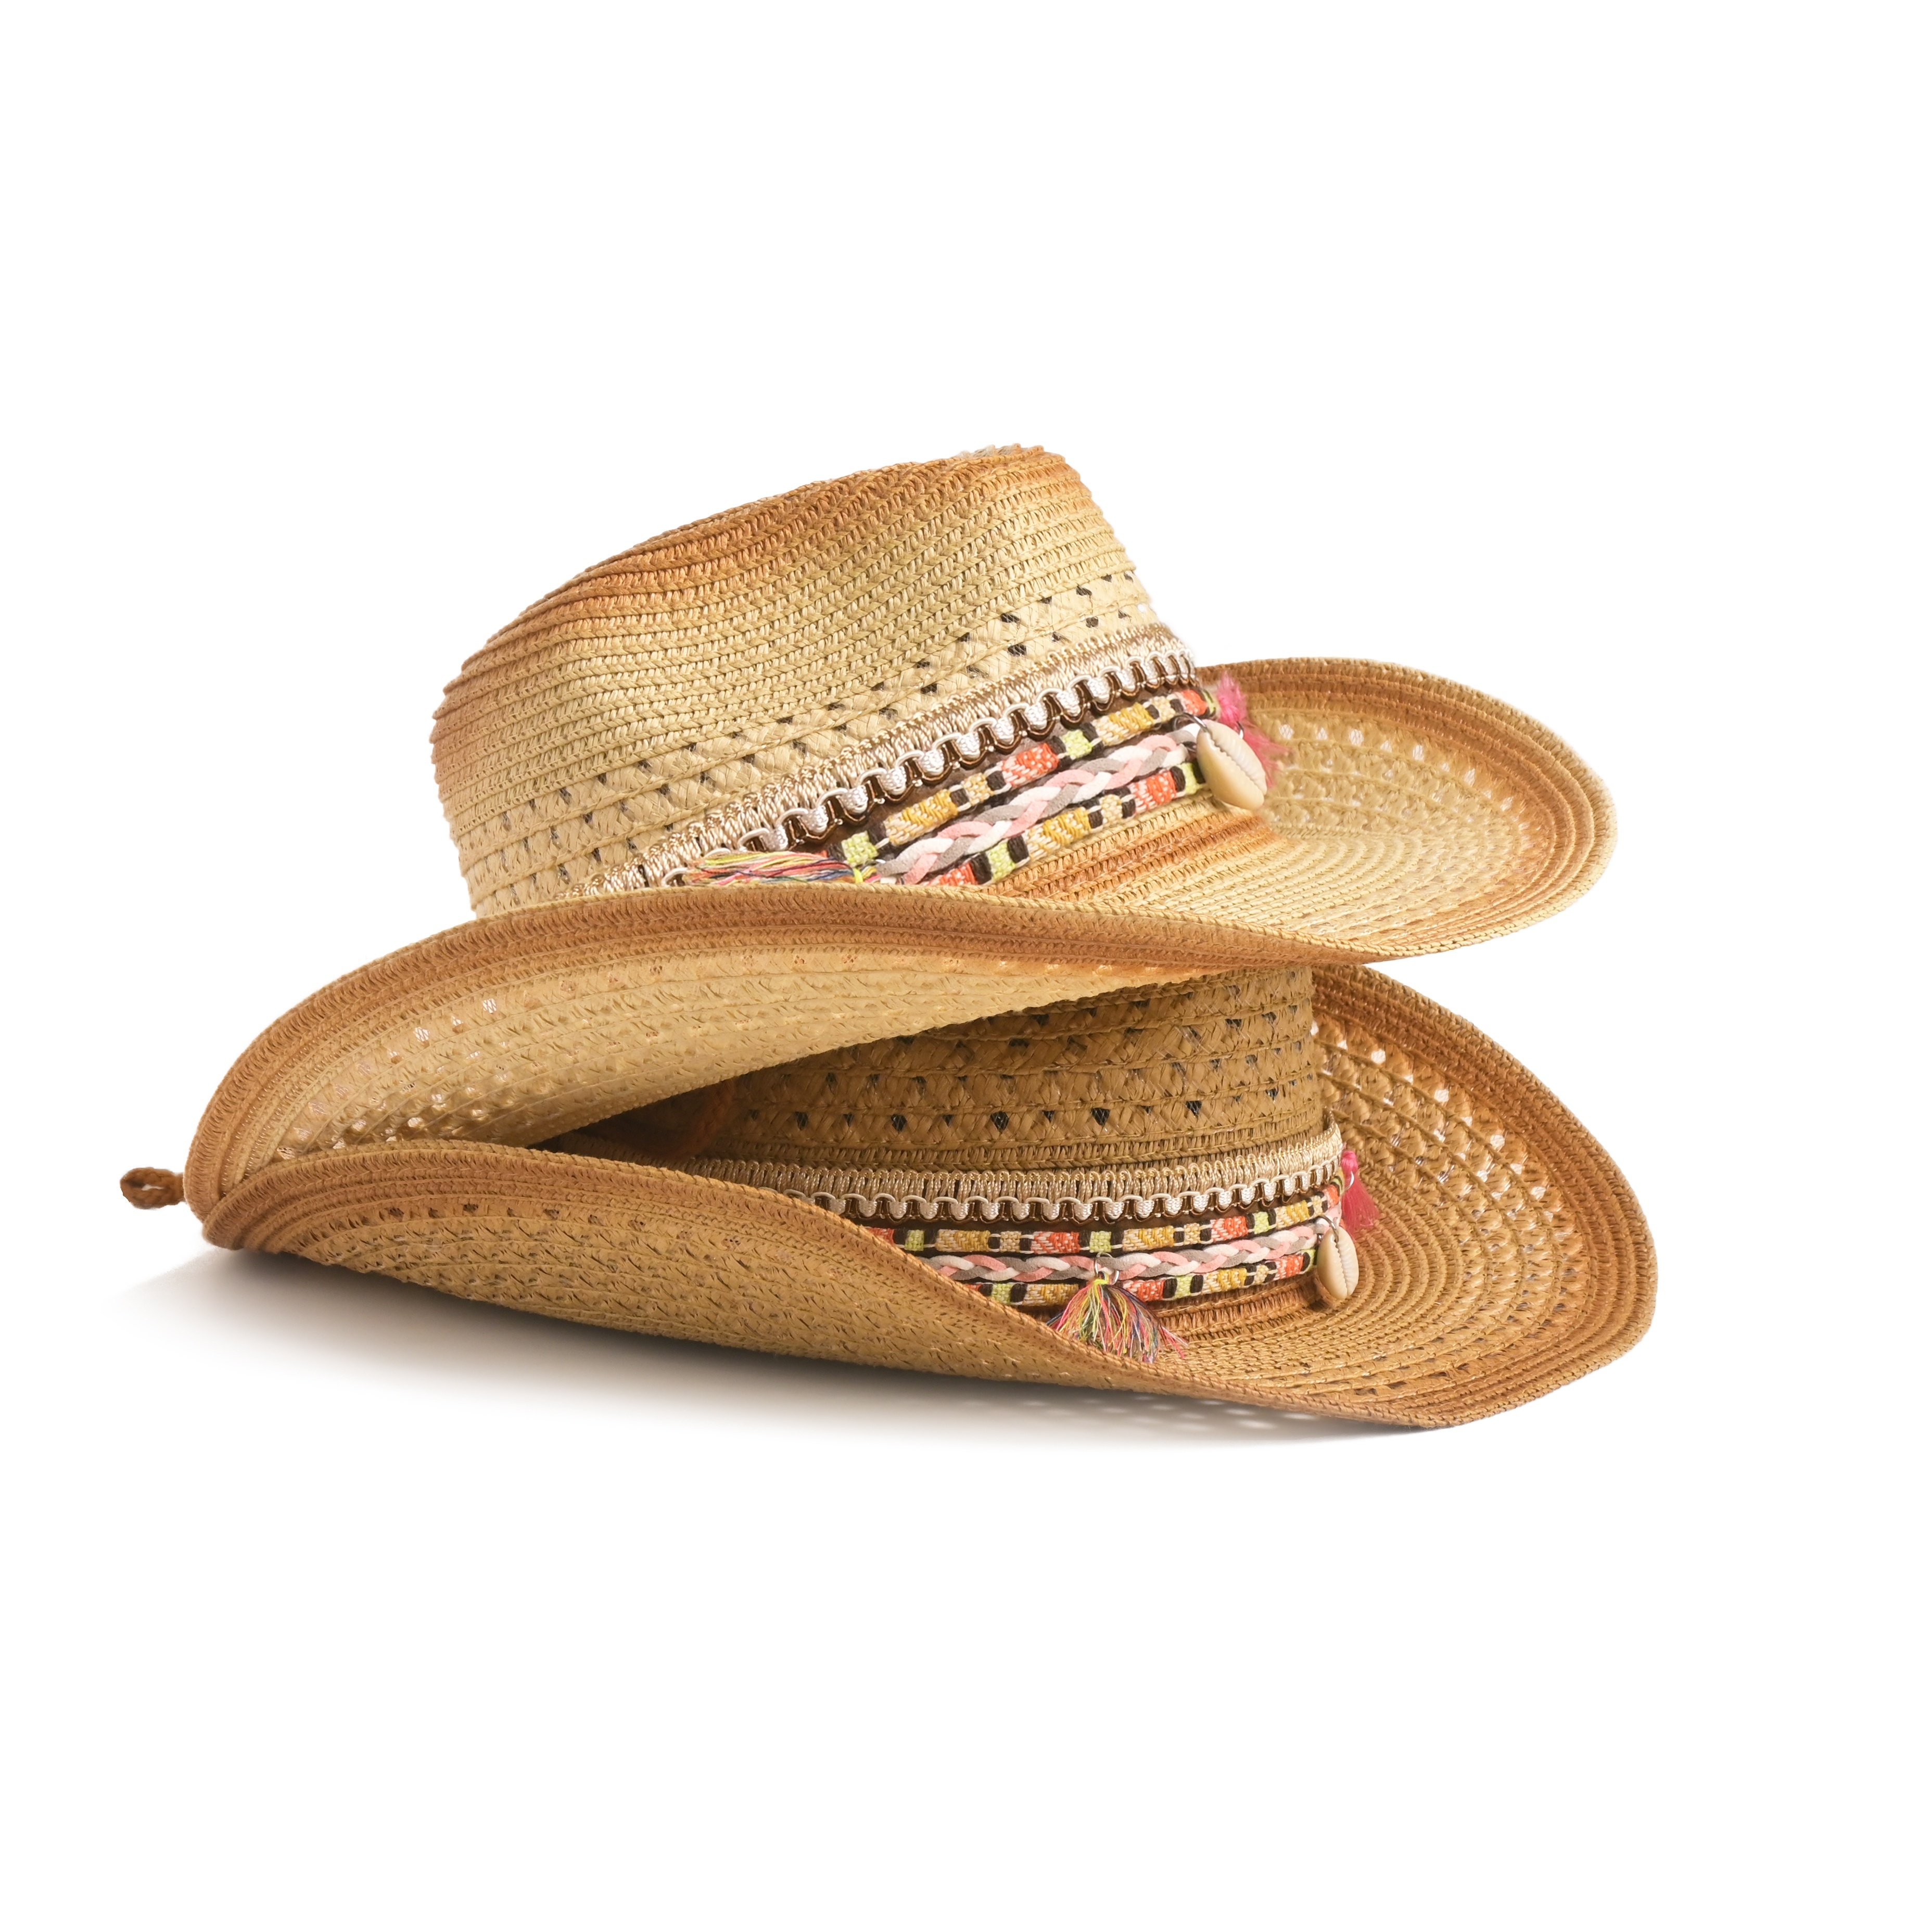 

Summer Straw Hat: Lightweight, Non-elastic, And Handwoven For Women - Perfect For Beach, Hiking, And Western Style